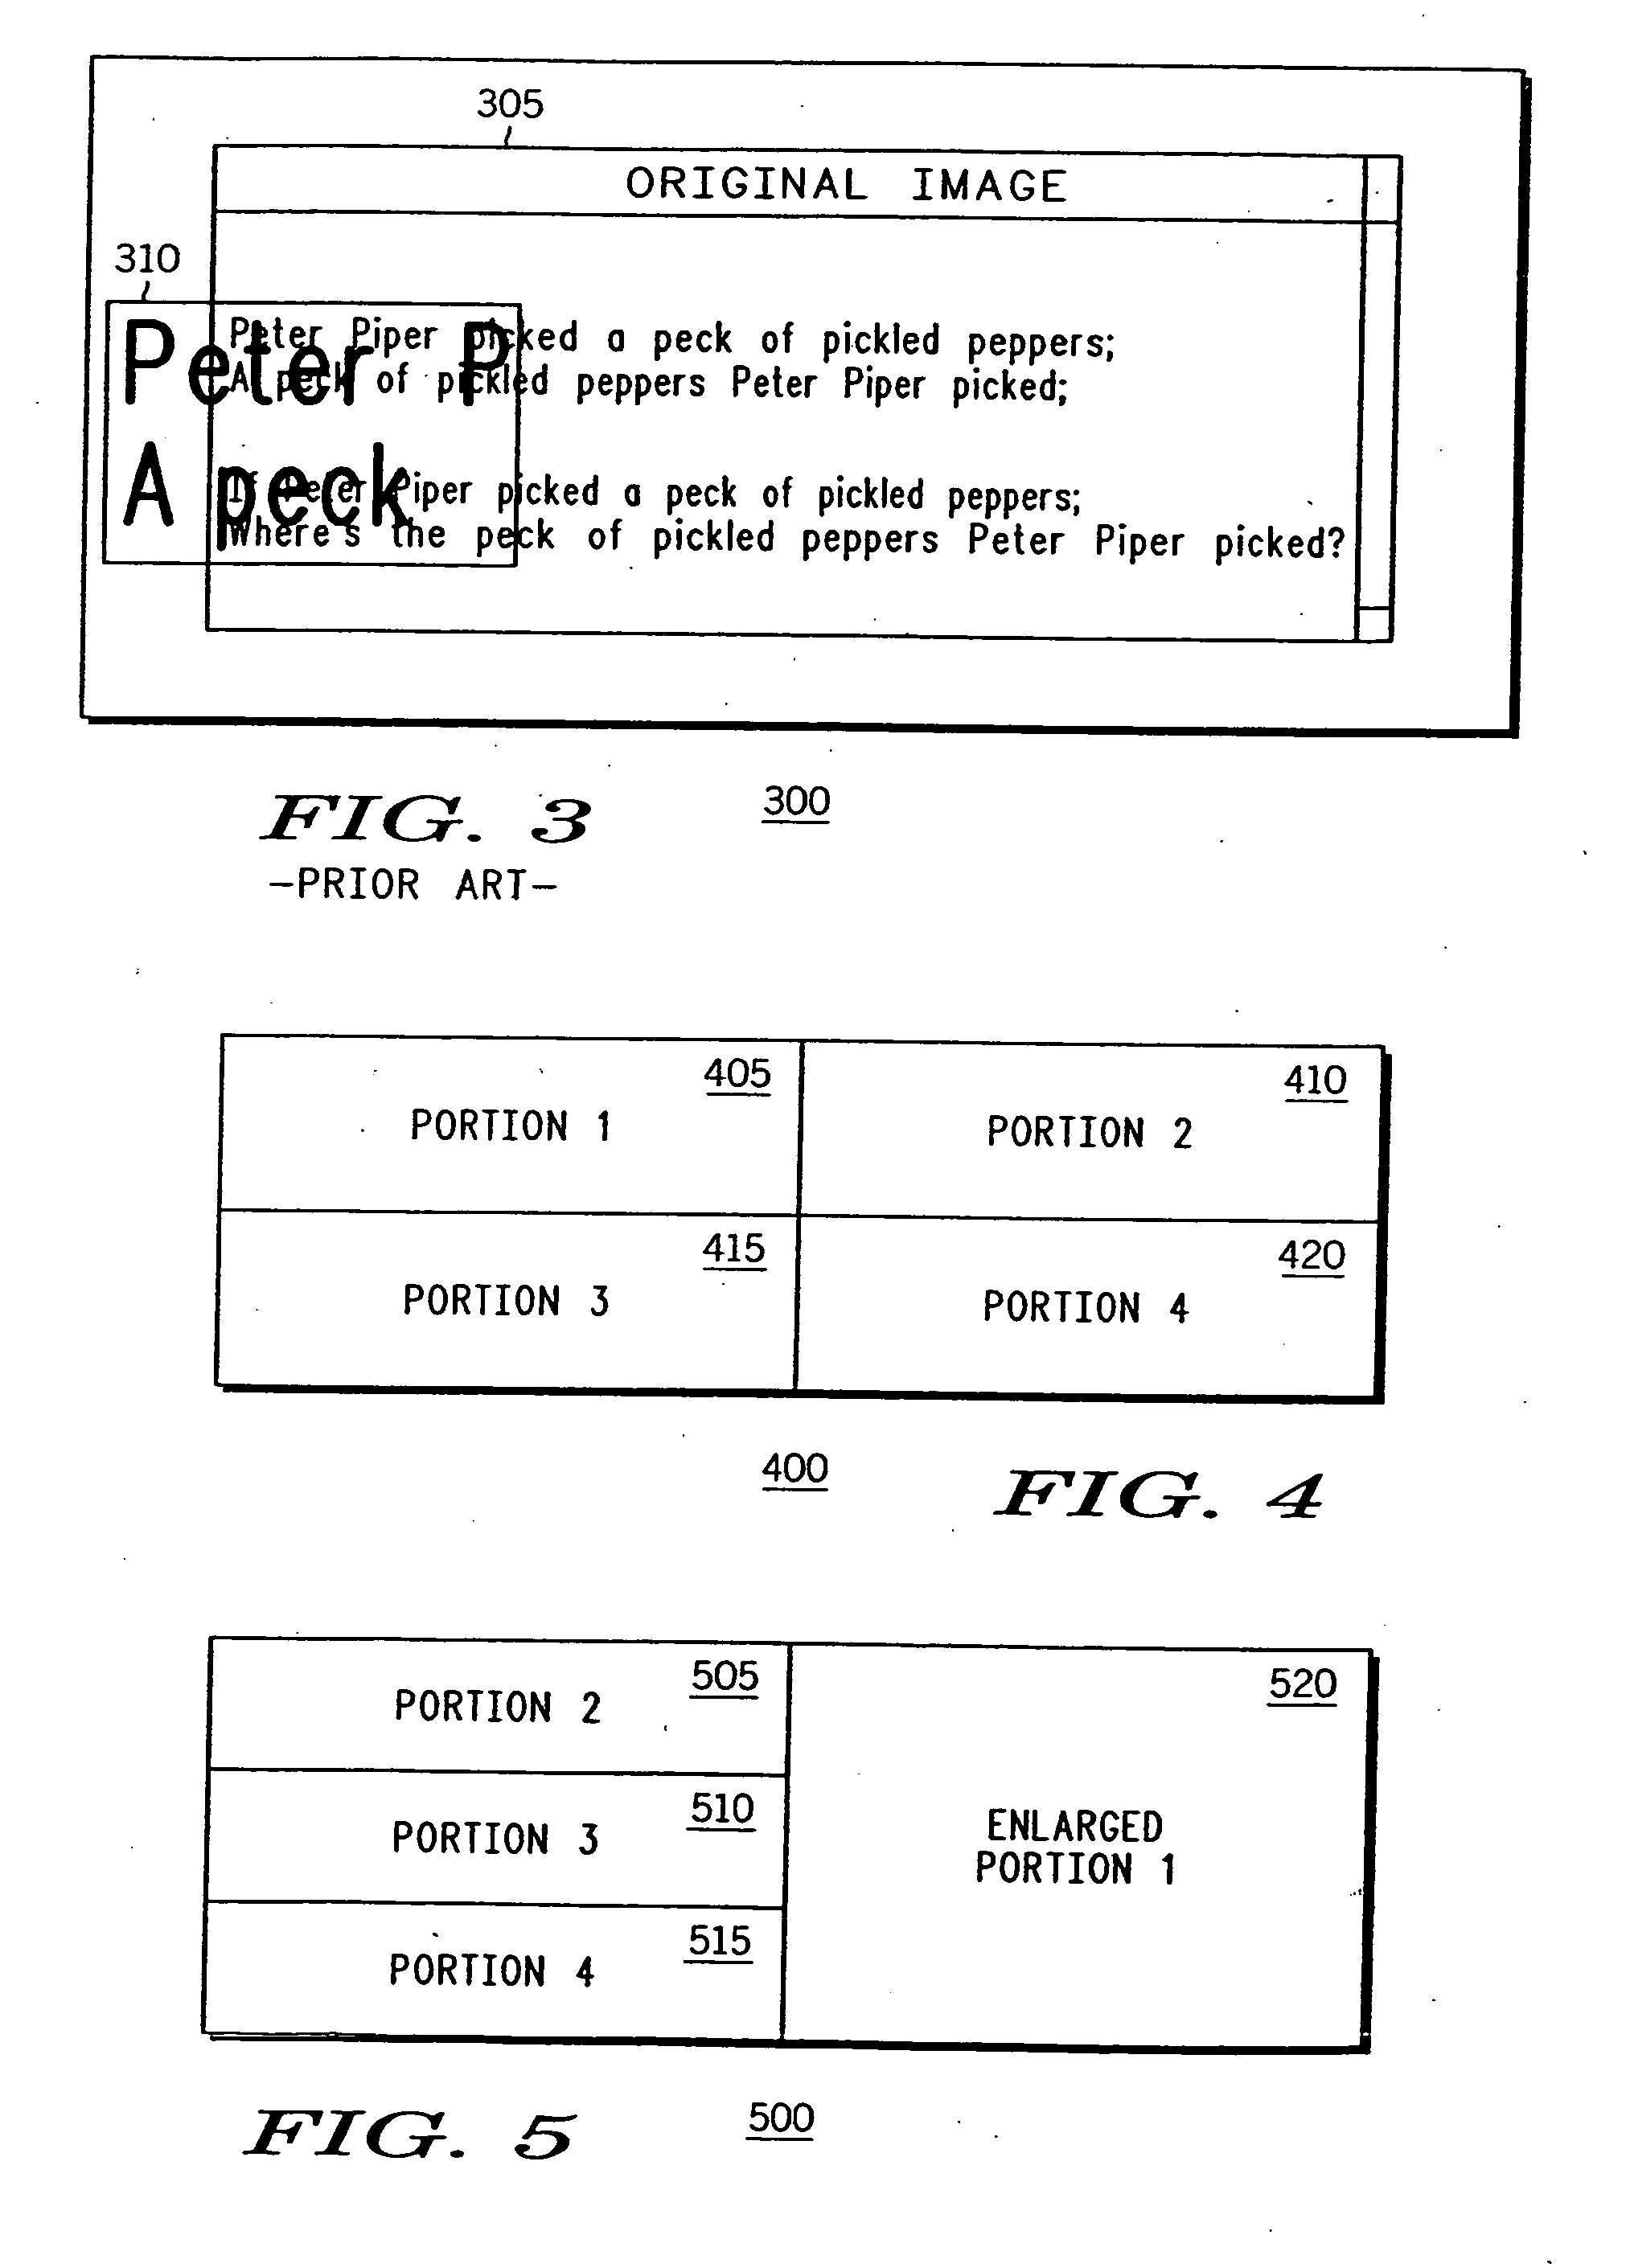 Method and apparatus for preserving, enlarging and supplementing image content displayed in a graphical user interface